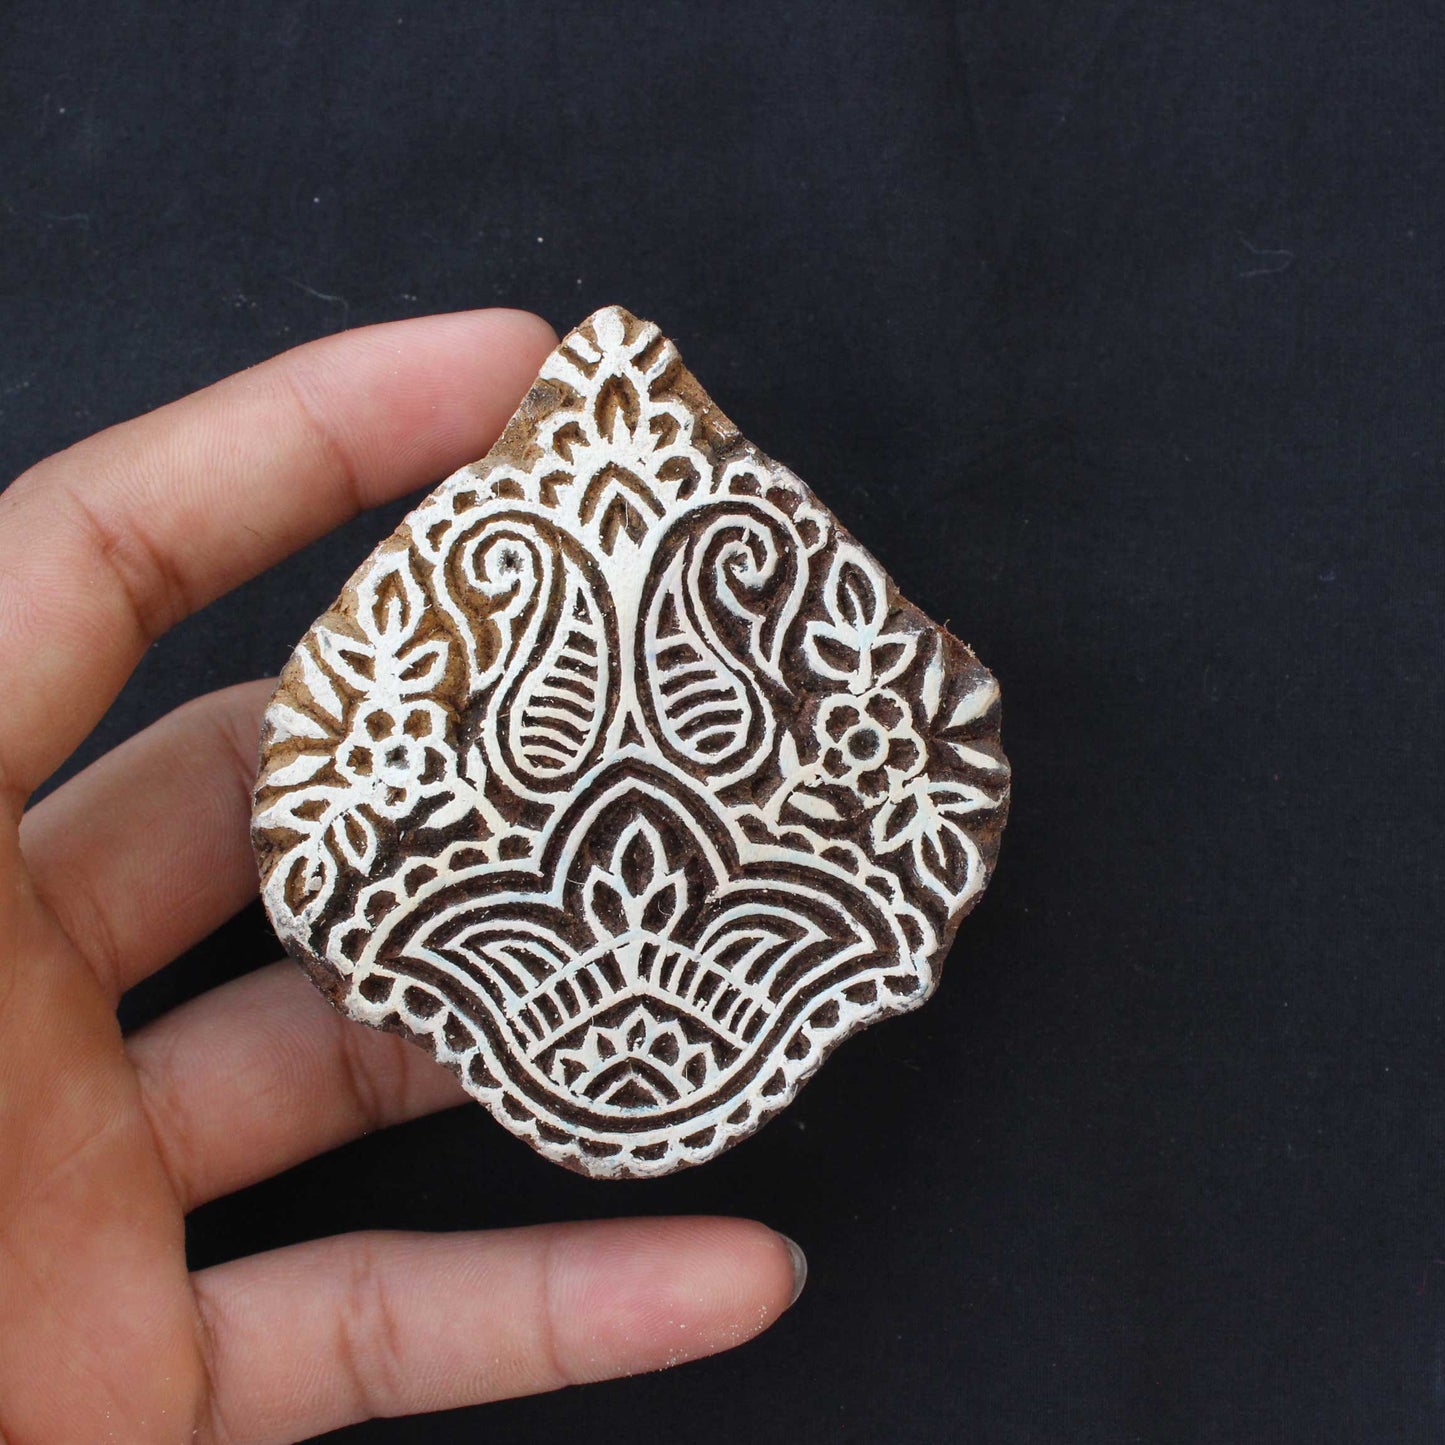 Paisley Fabric Block Print Stamp Floral Wood Block Stamp Hand Carved Stamp Hand Carved Wooden Stamp For Printing Petals Soap Stamp Fern